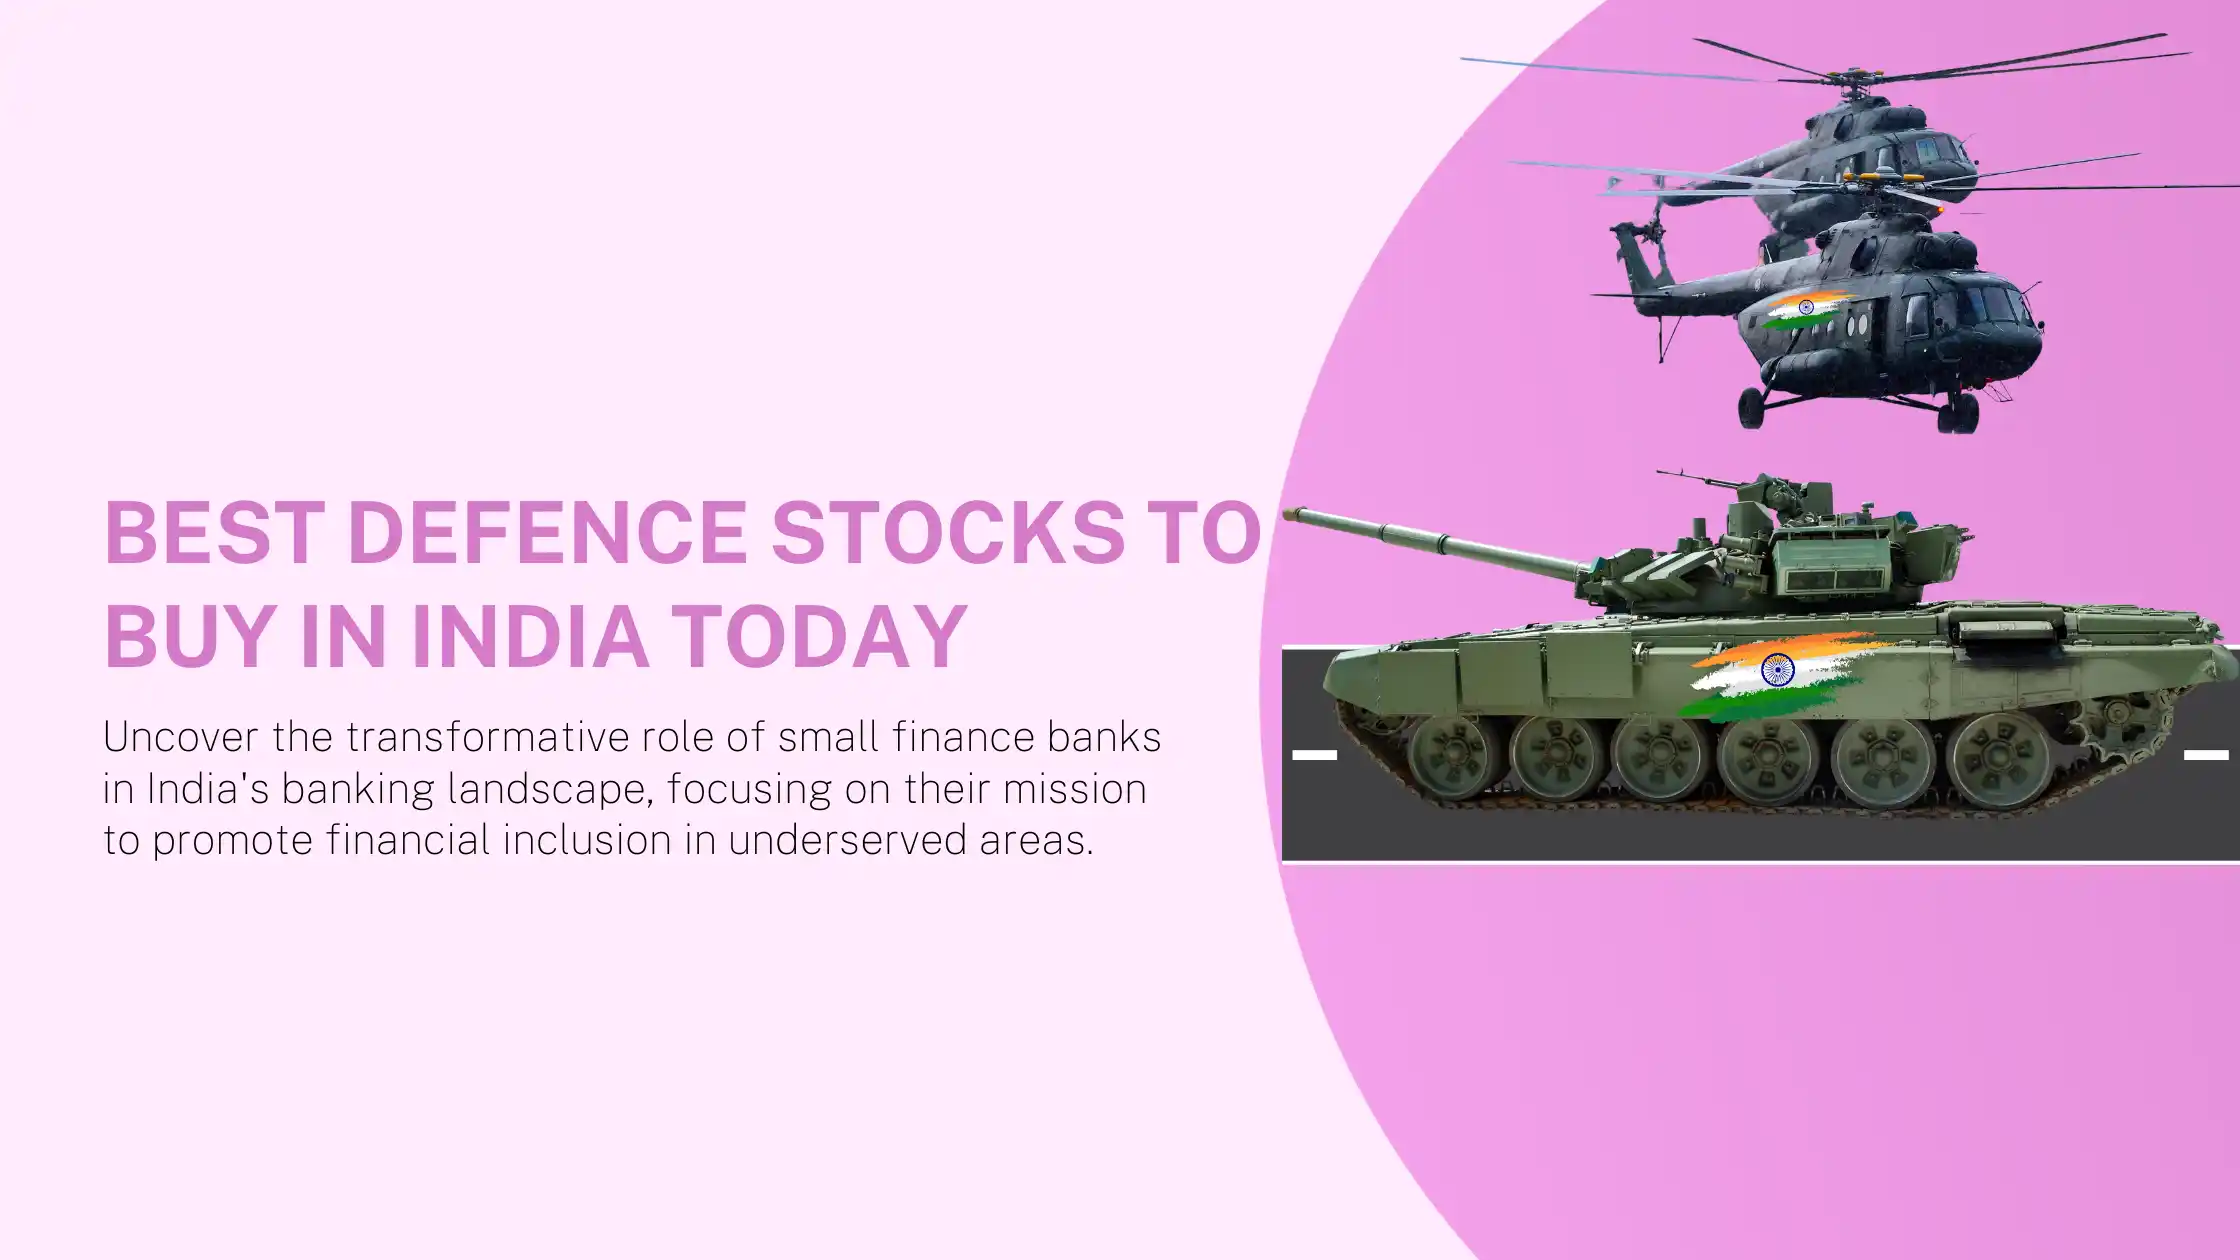 Best Defence Stocks to Buy in India Today